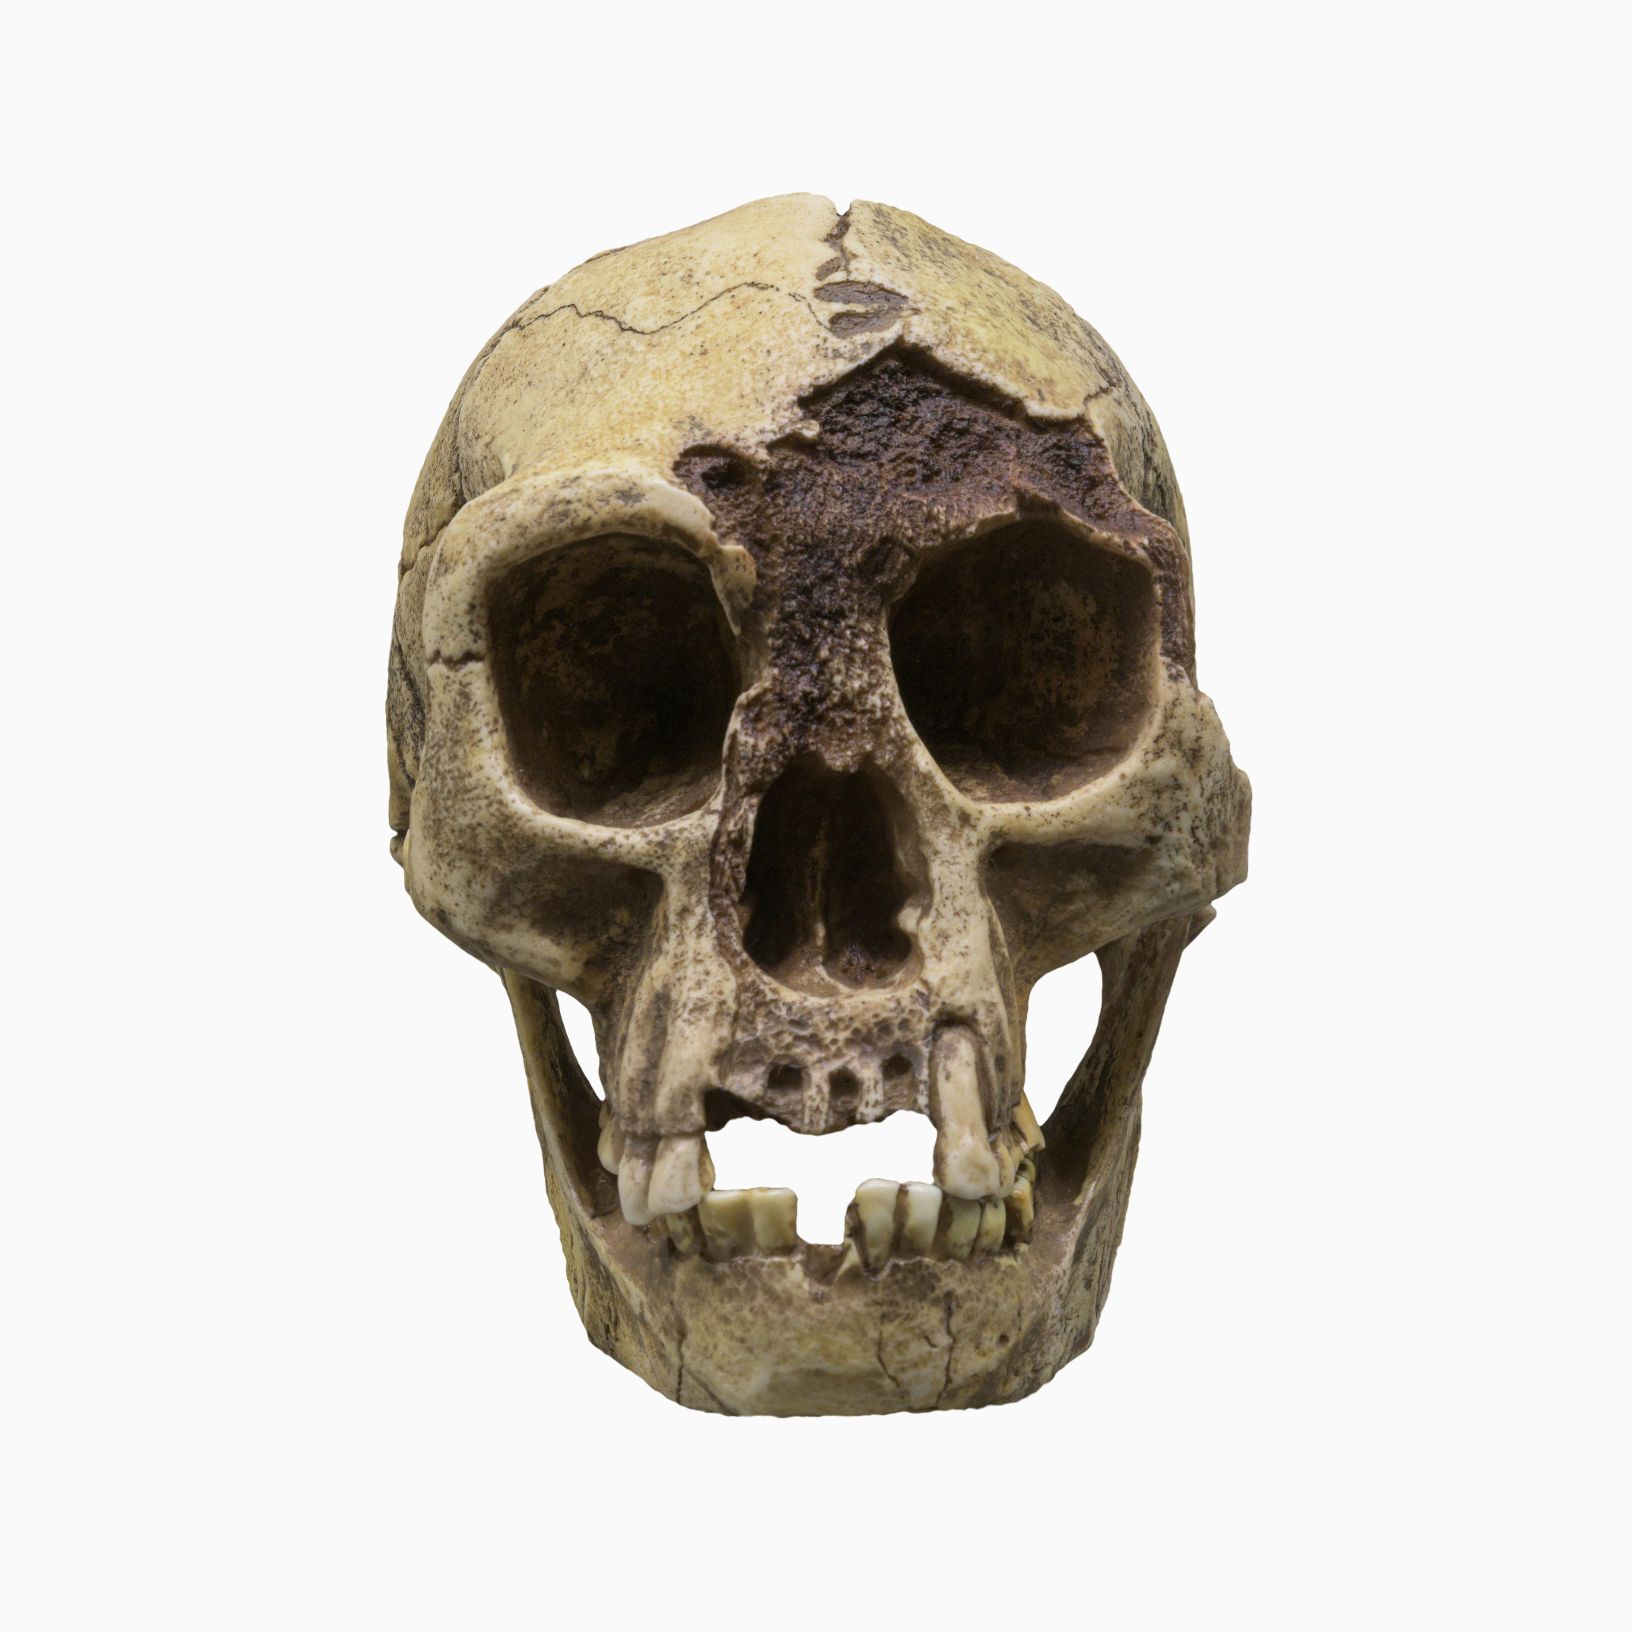 Skull of H. floresiensis (Flores Man), nicknamed 'Hobbit', is a species of small archaic human that inhabited the island of Flores, Indonesia. © Image Credit: Dmitriy Moroz | Licensed from DreamsTime.com (Editorial/Commercial Use Stock Photo, ID: 227004112)